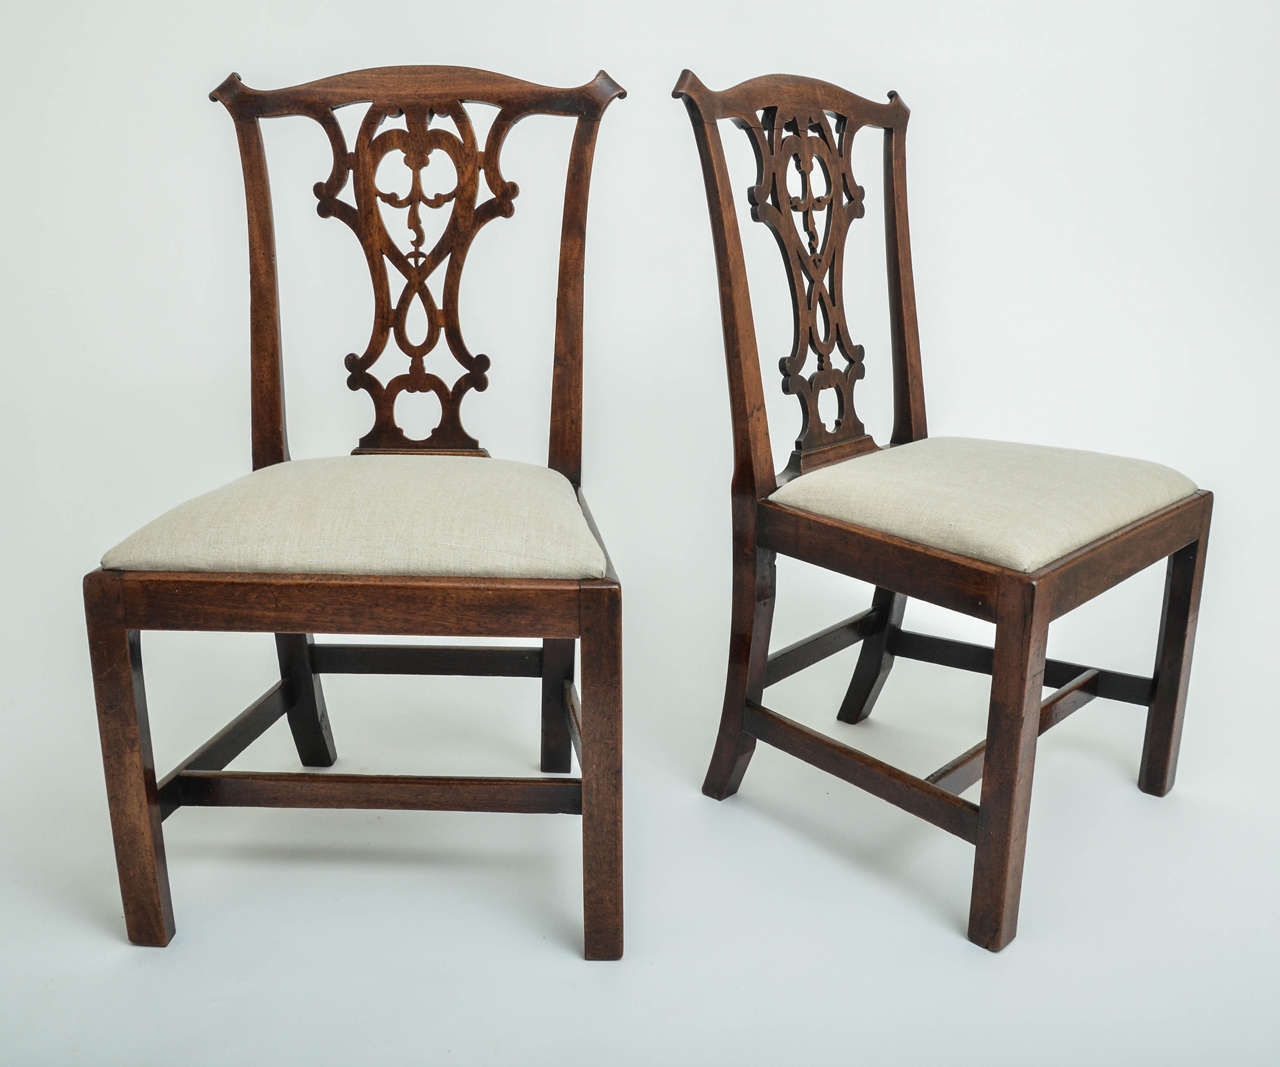 A pair of 18th century George III mahogany side chairs with drop-in seat, pierced splat, and H-stretcher.